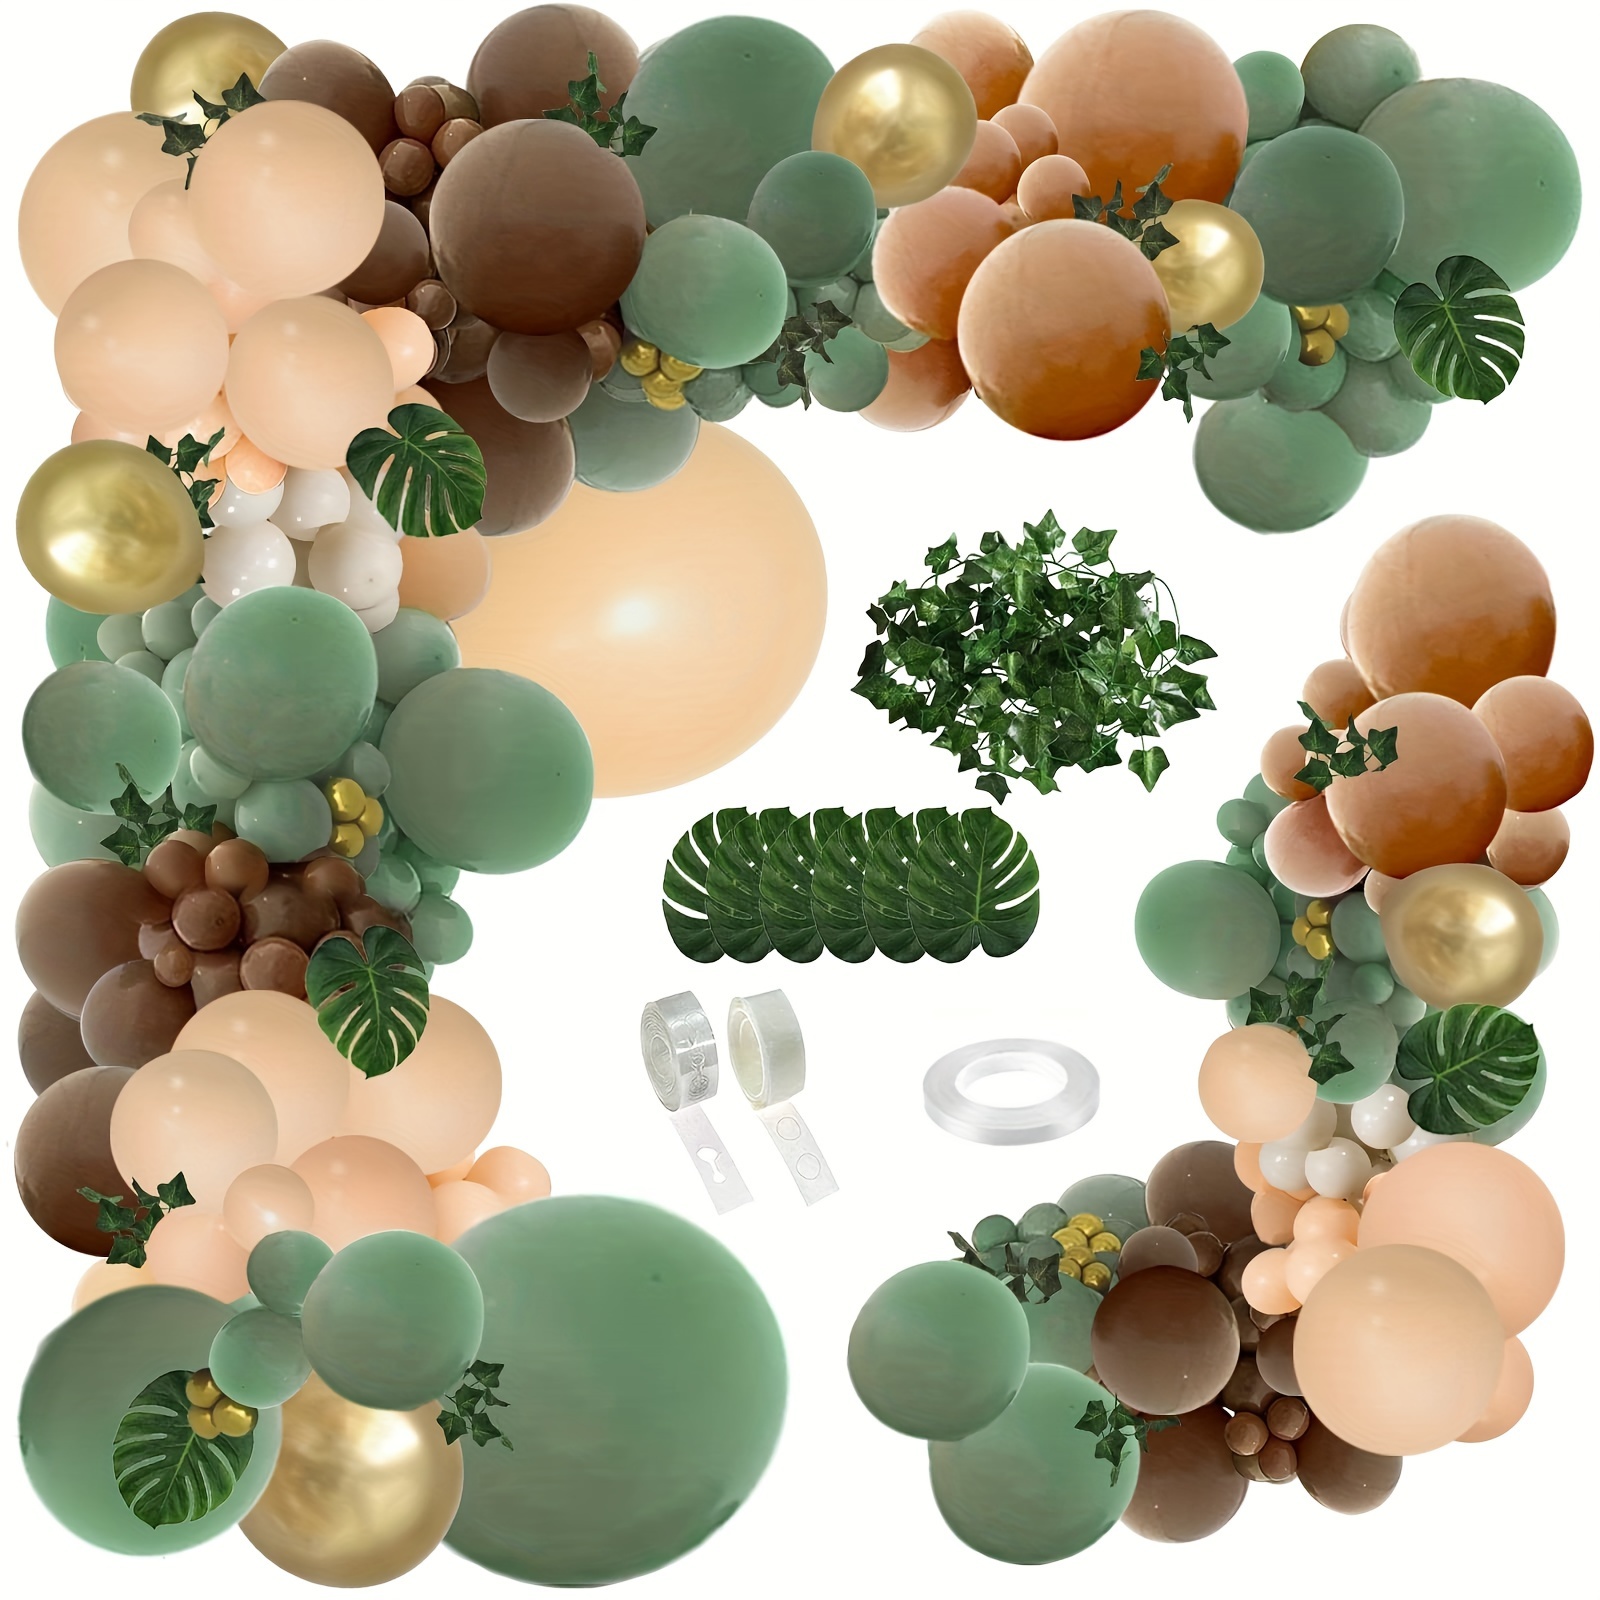 

108pcs, Sage Green Brown Balloon Garland Kit, Jungle Safari Wild Woodland Balloon Arch, Olive Green Gold Coffee Cocoa Balloons For Birthday Wedding Shower Party Decor Balloons, Party Supplies